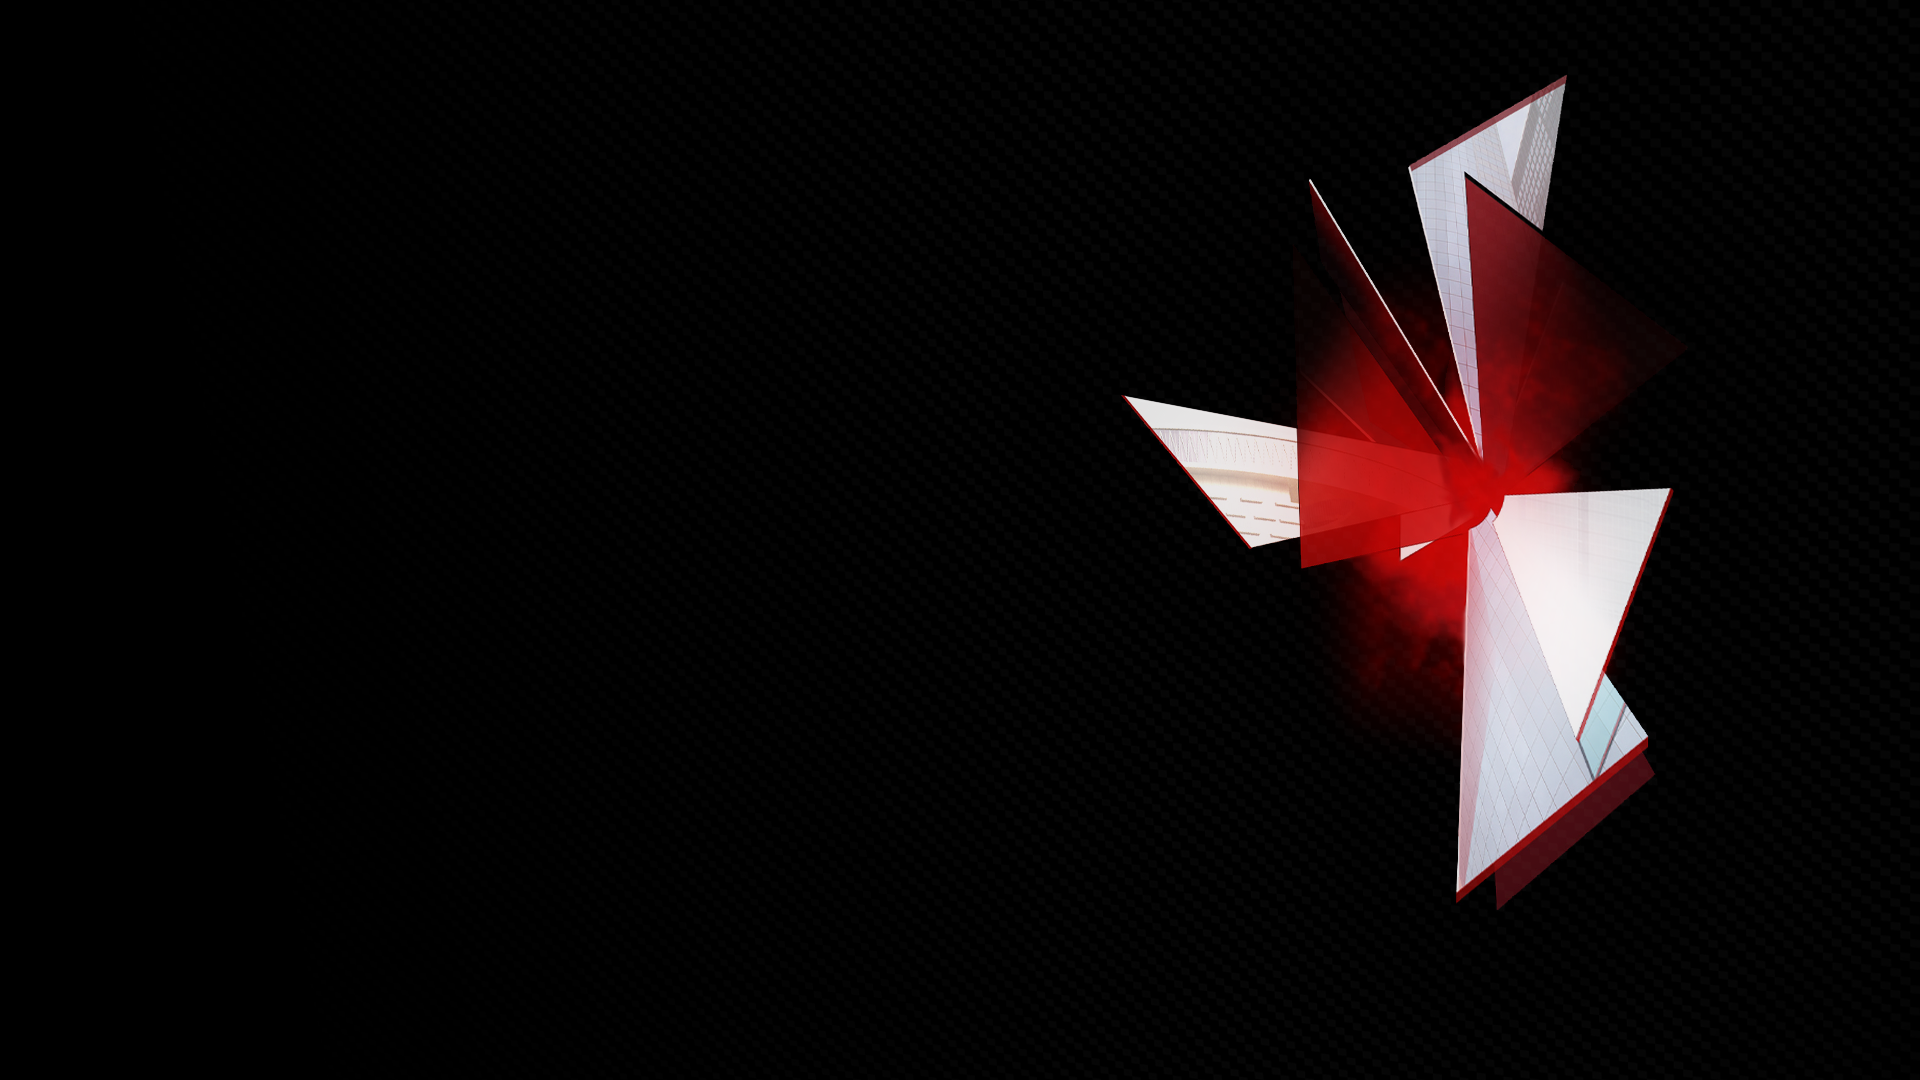 Umbrella Corporation Wallpaper by timperator on